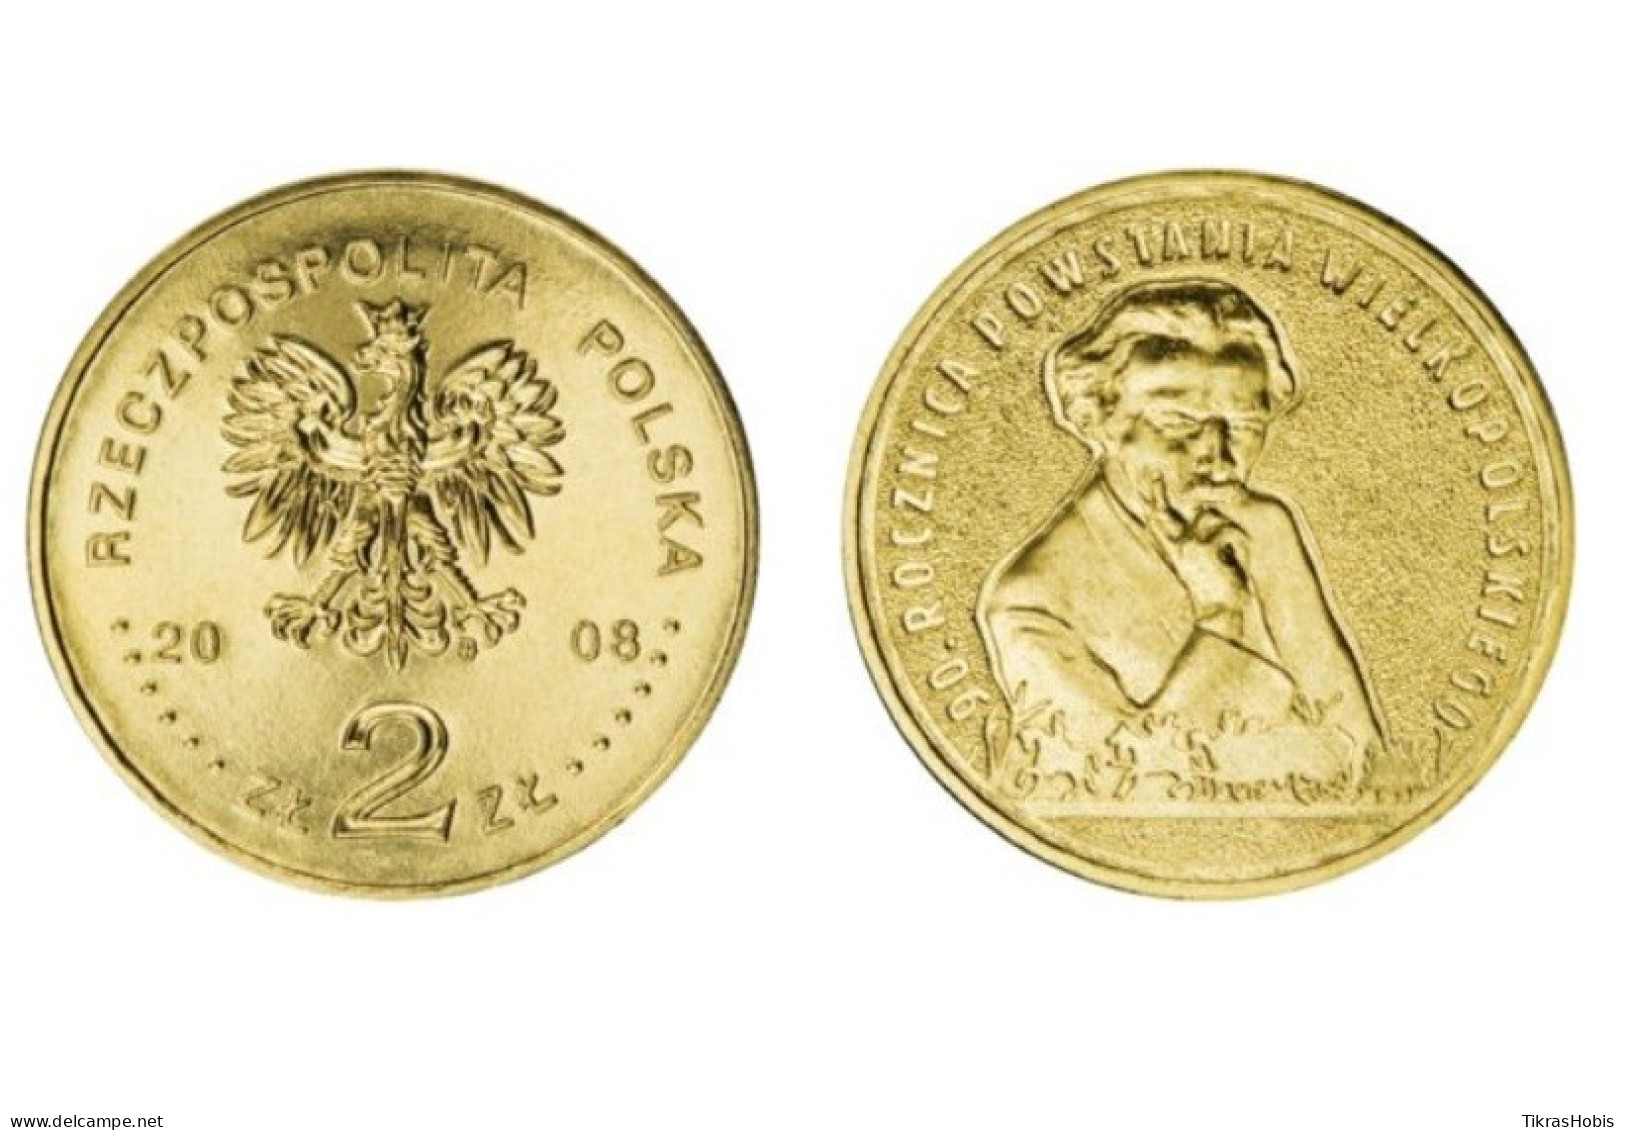 Poland 2 Zlotys, 2008 90 Years Of The Uprising. Y662 - Polen